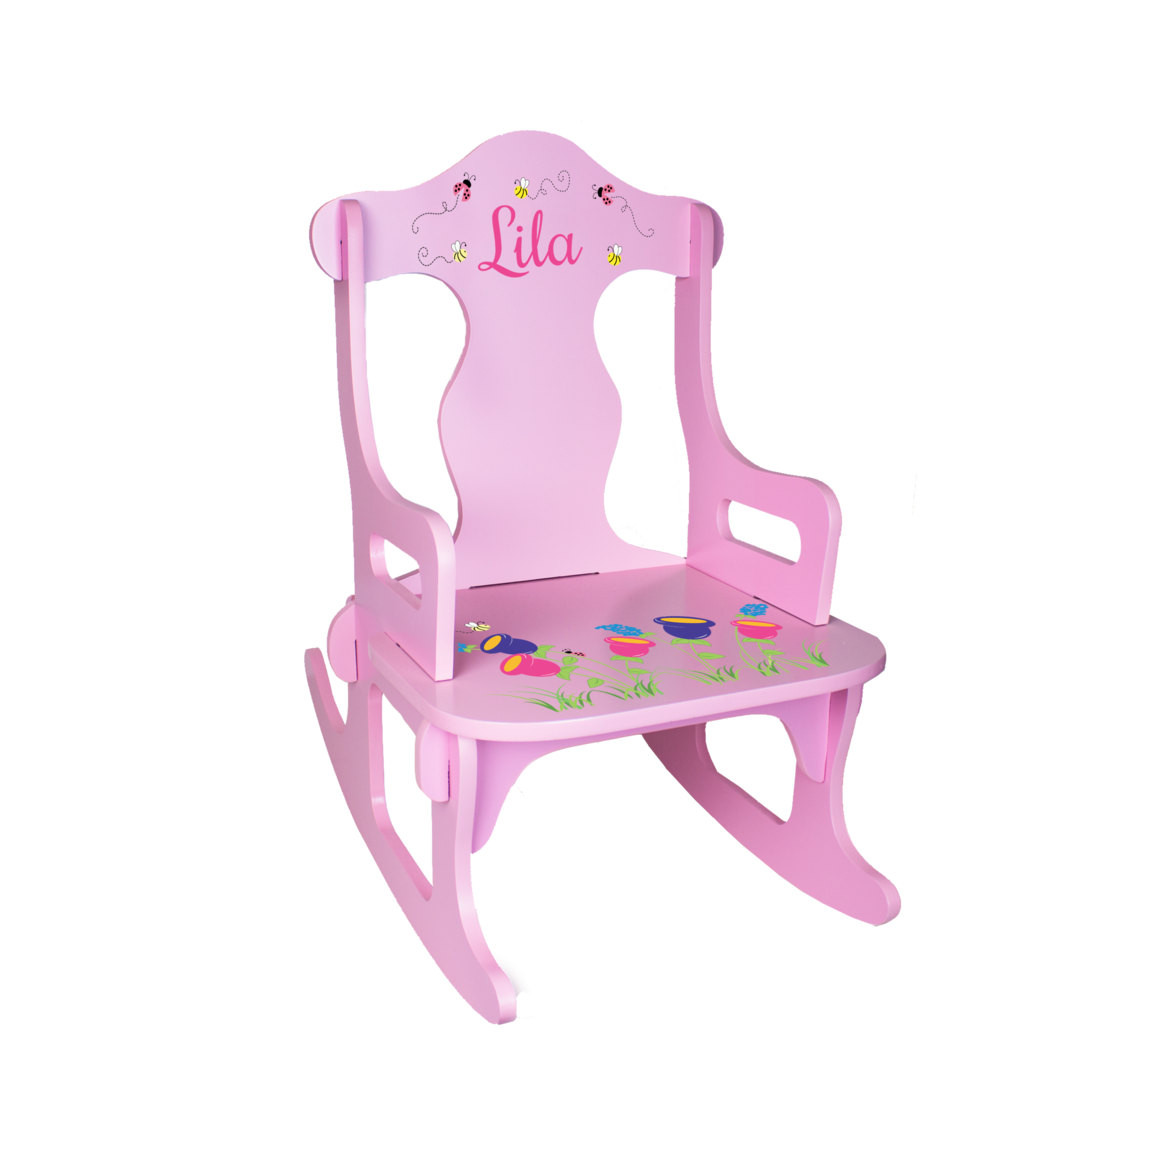 Personalized Kids Rocking Chair
 Personalized Kids Rocking Chair Custom Pink by WizkickGifts